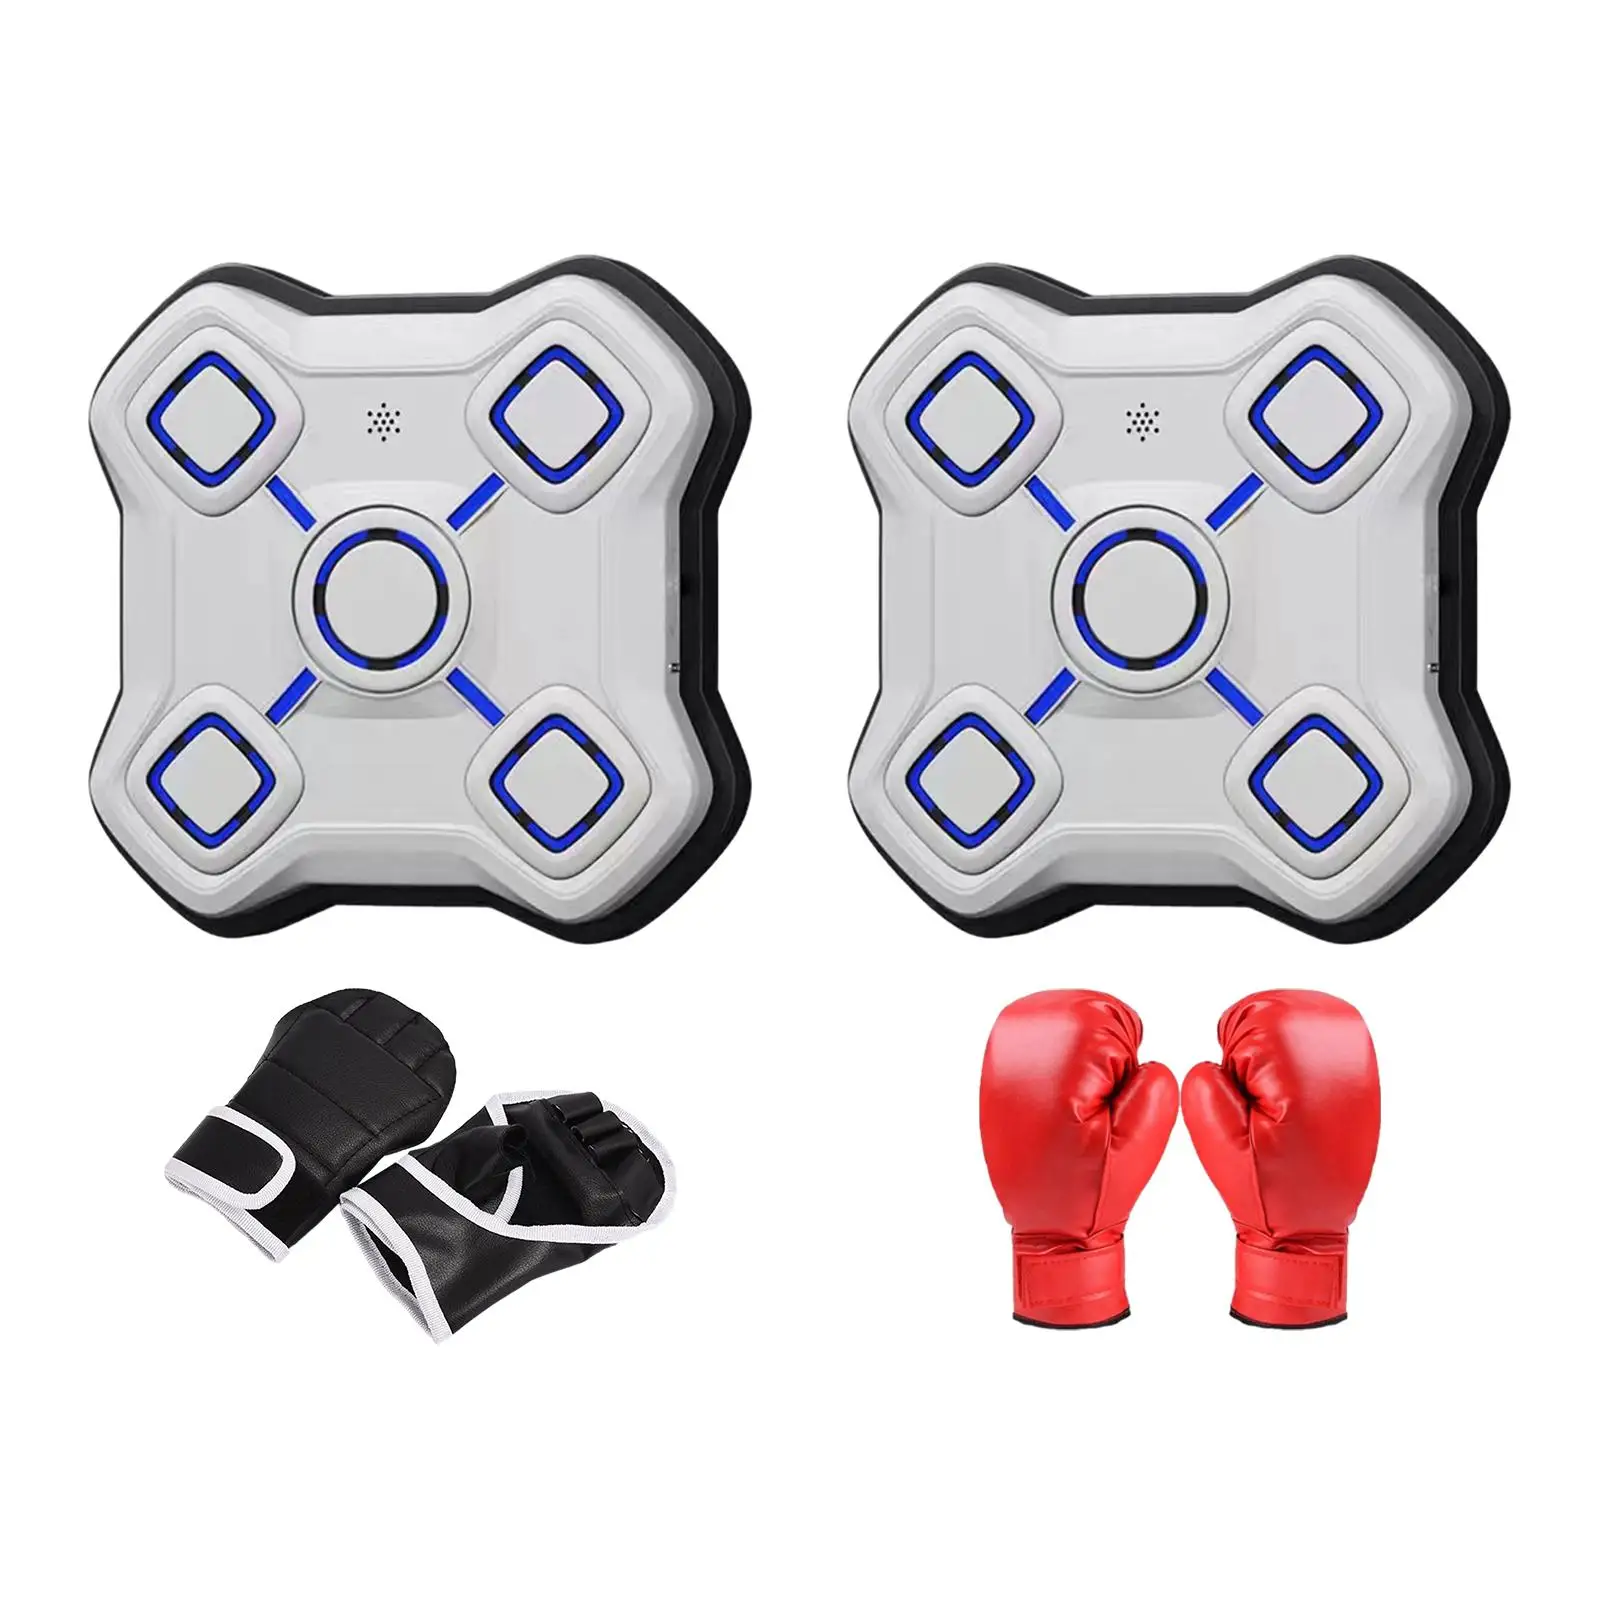 Boxing Machine Boxing Trainer Boxing Training Equipment Punching Pad for Sports Agility Kickboxing Strength Training Home